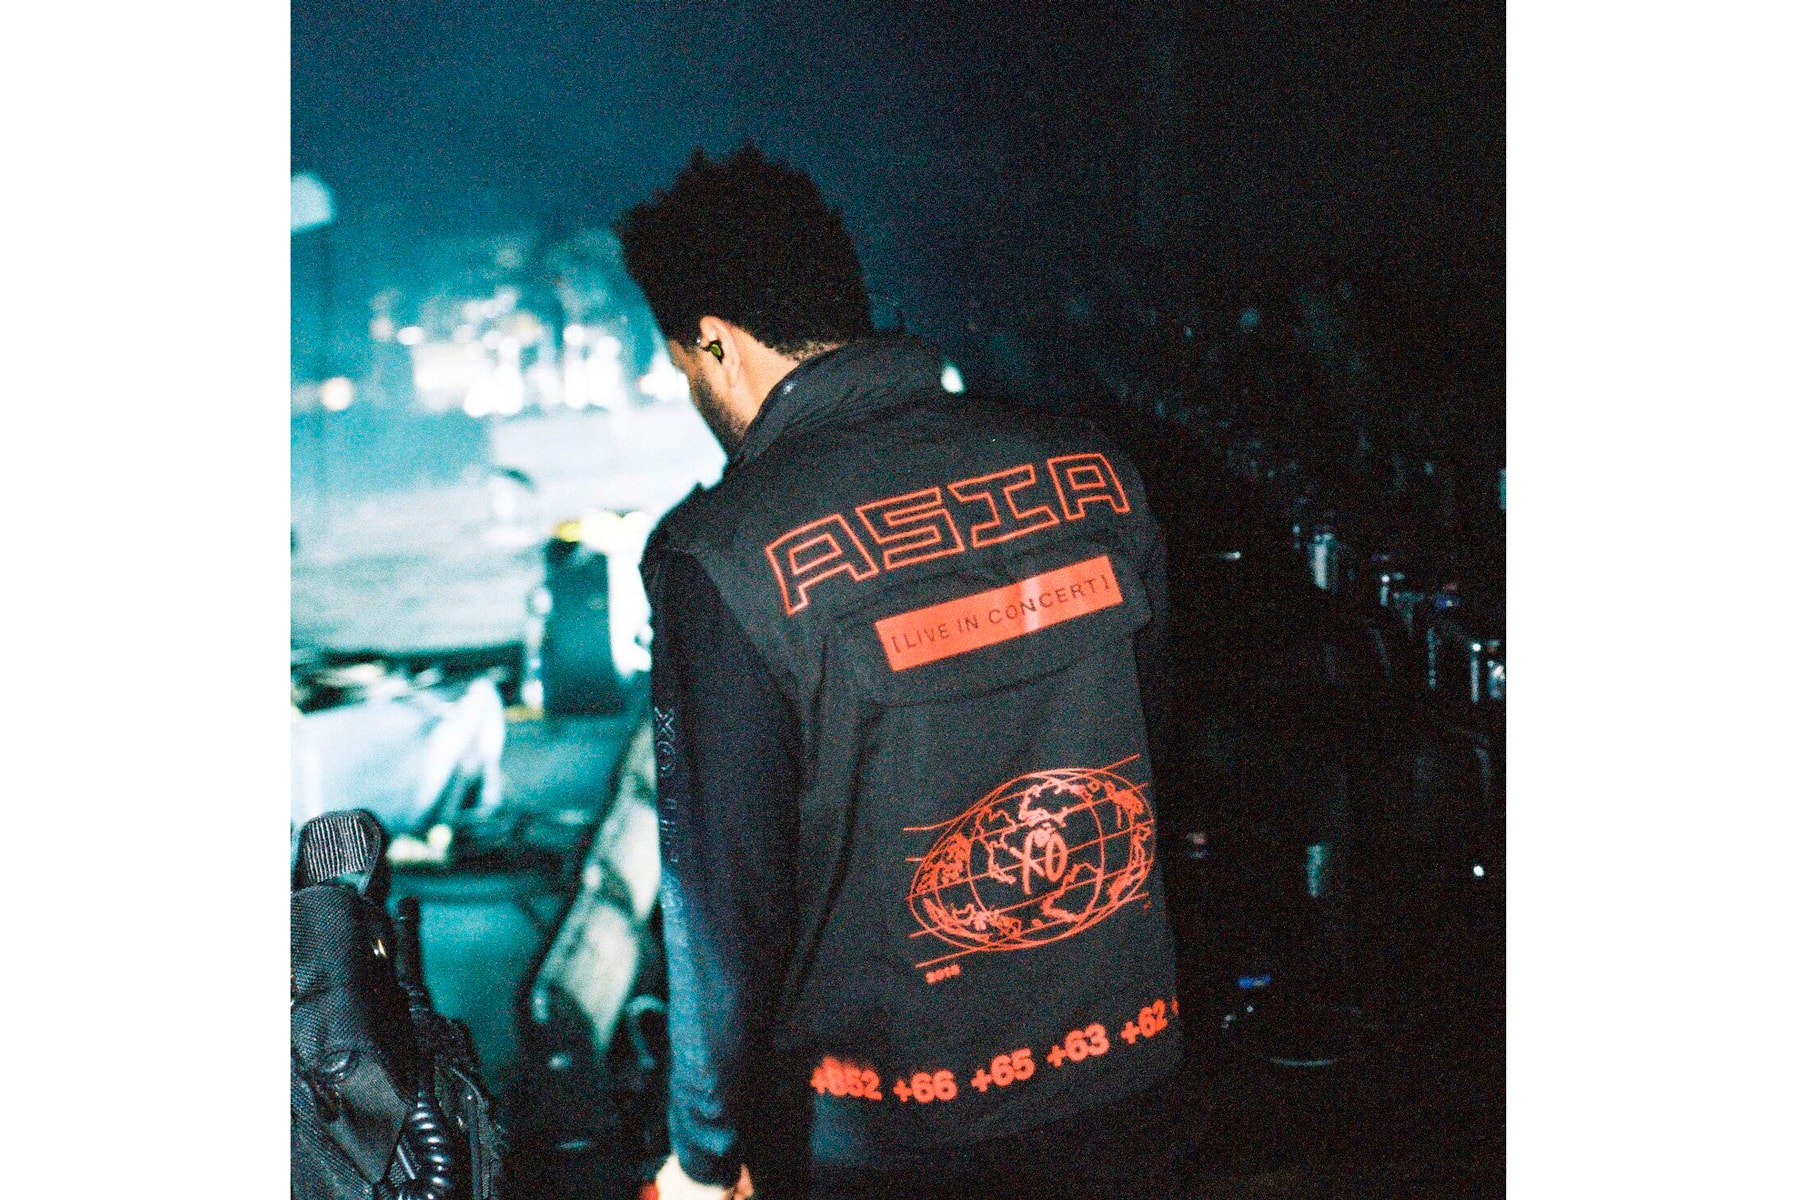 The Weeknd Limited Edition Asia Tour Merch four days 96 hours lookbook ox starboy